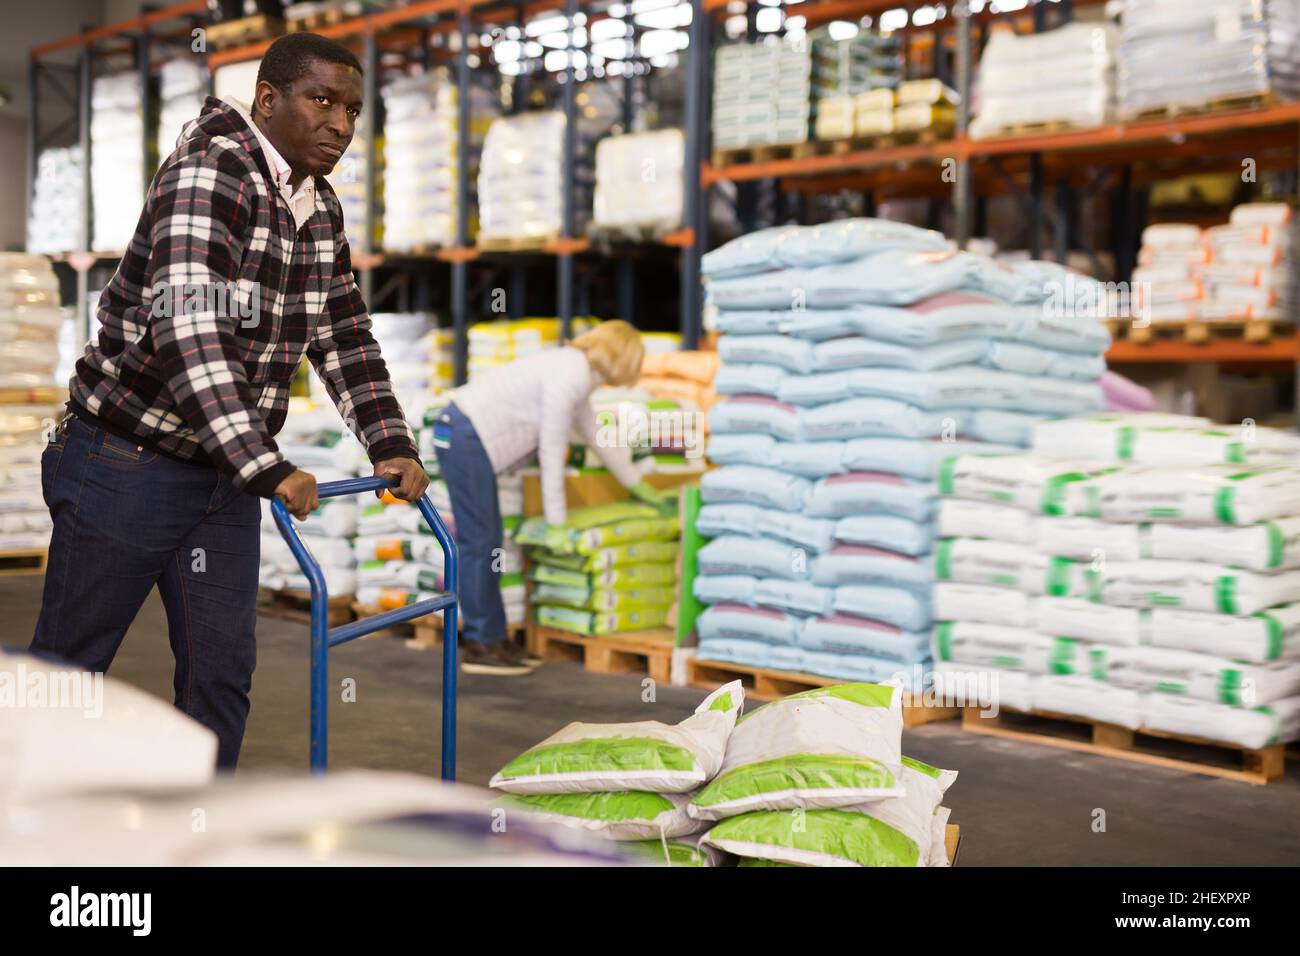 Adult African American worker pushing handtruck Stock Photo